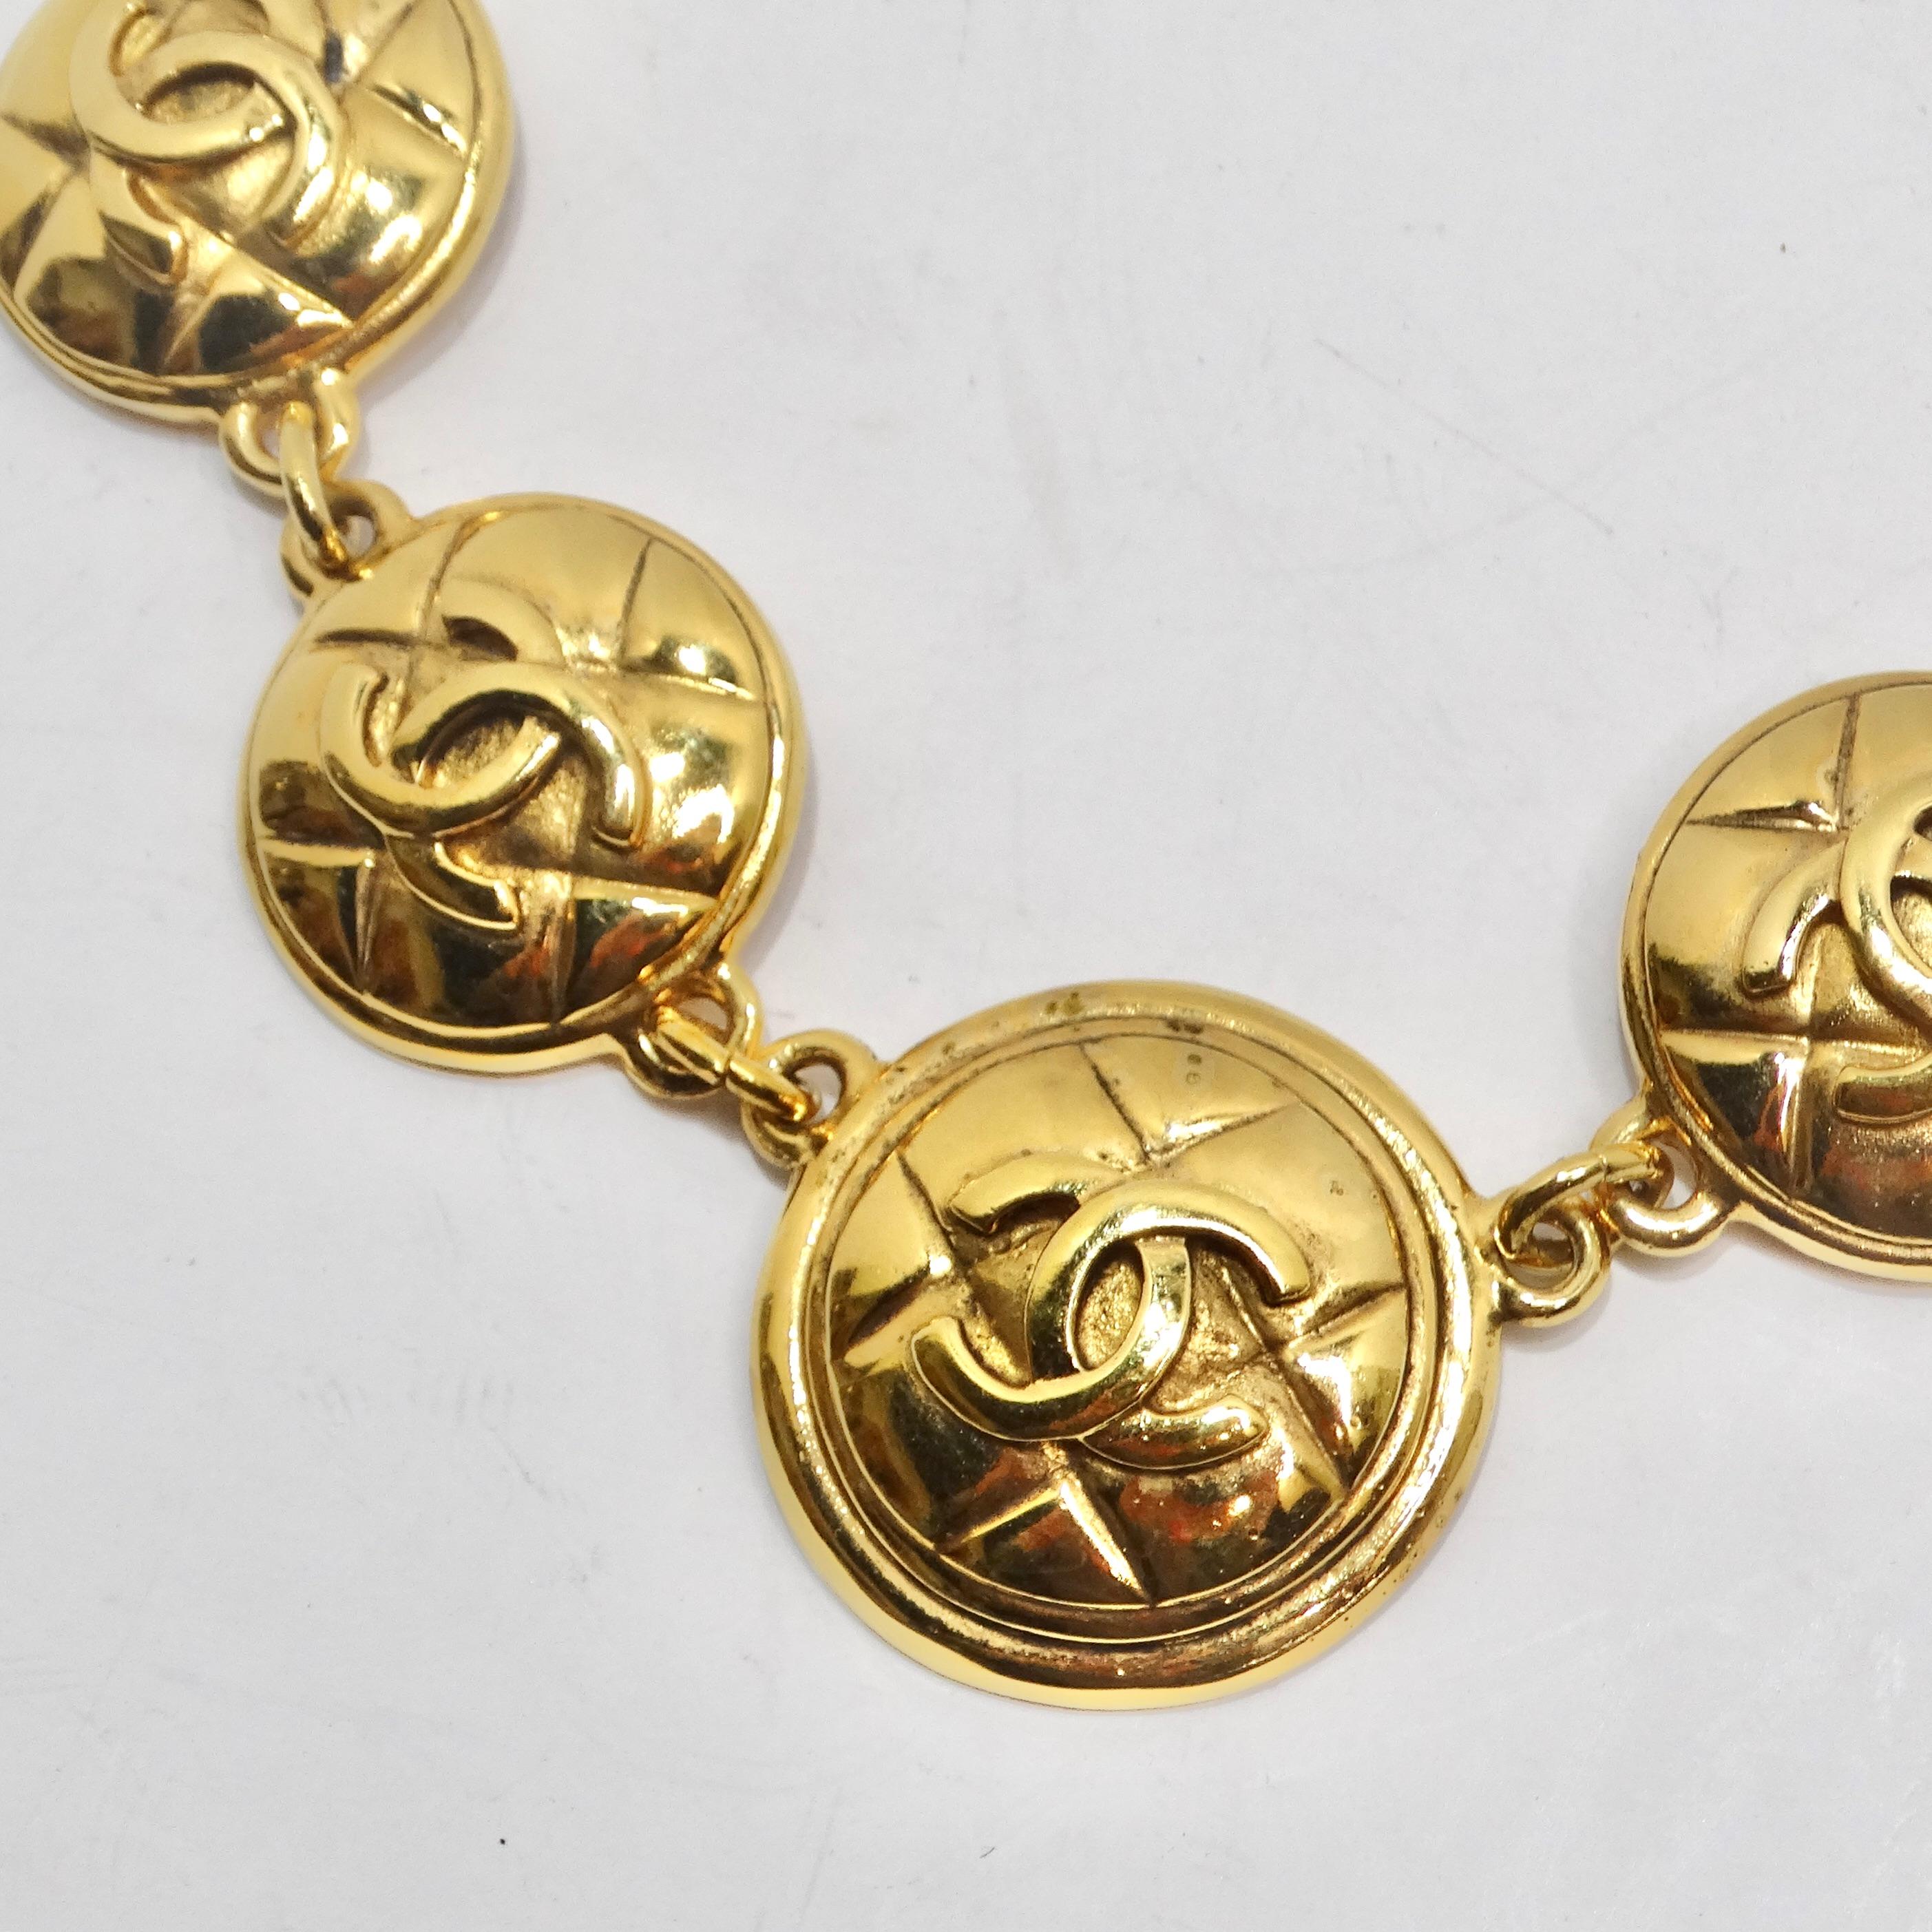 Chanel 1980s Gold Tone Logo Quilted Medallion Necklace In Excellent Condition For Sale In Scottsdale, AZ